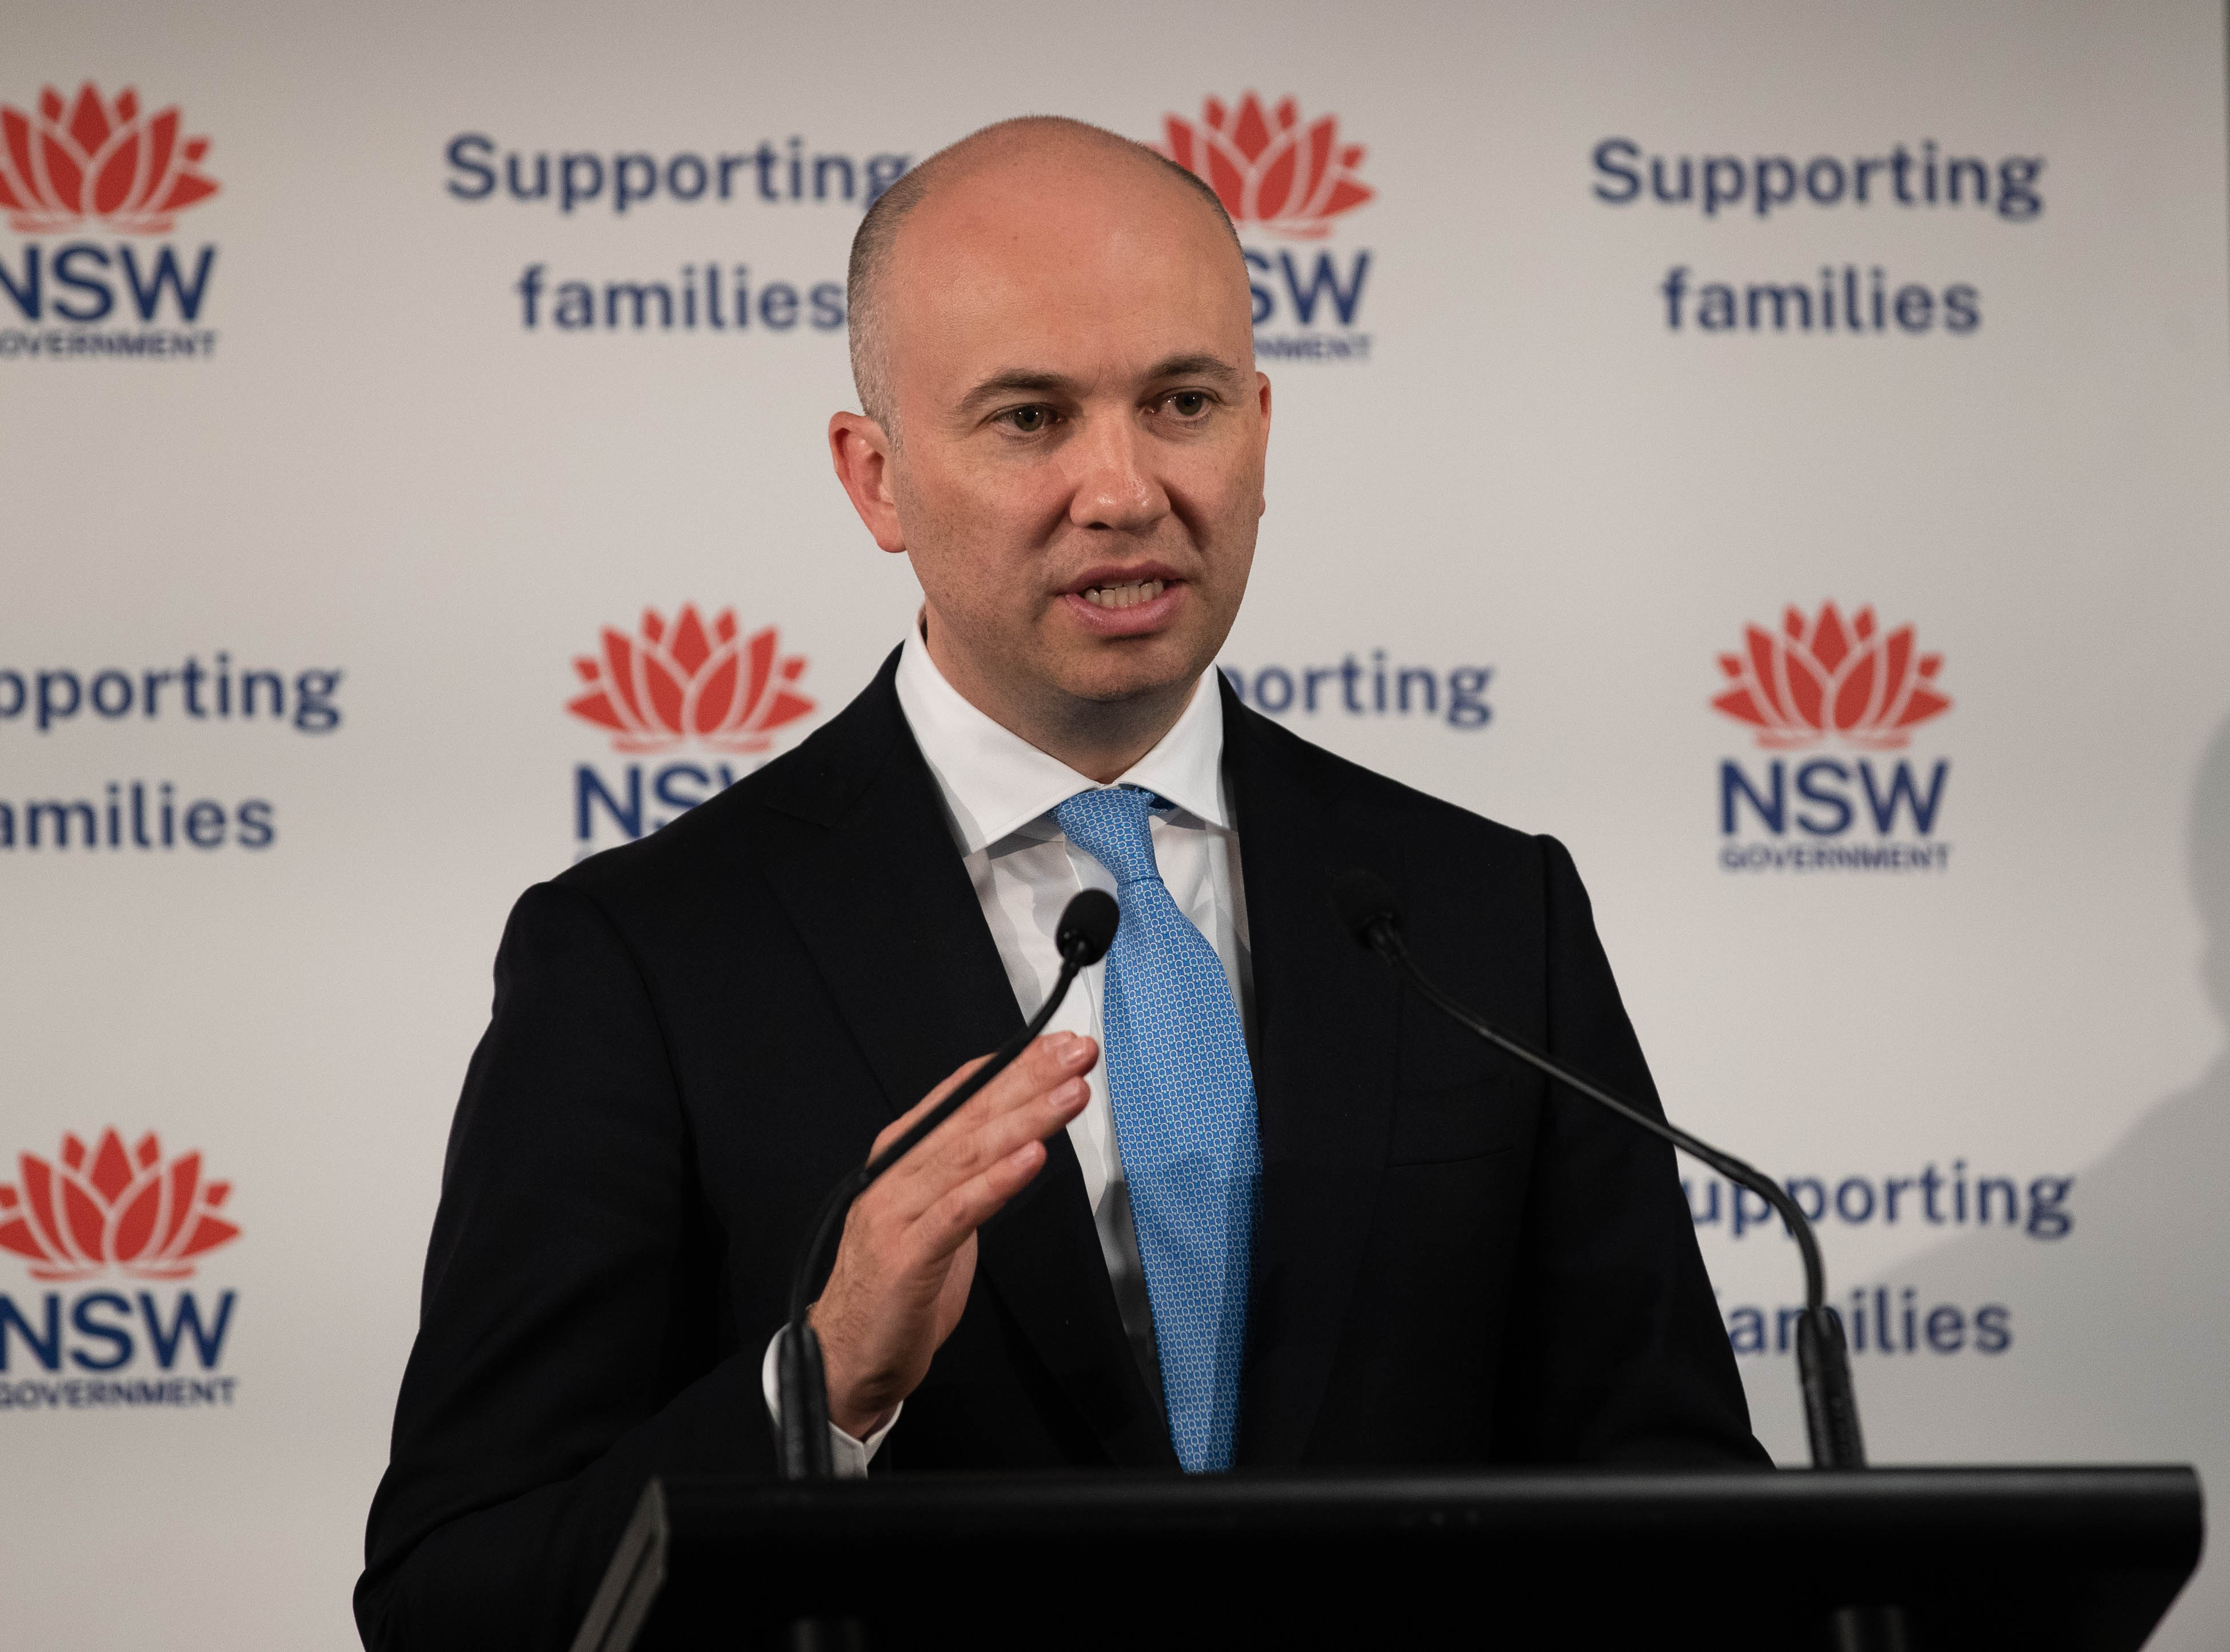 NSW Treasurer, Matt Kean outlines his budget to reporters prior to his budget speech in NSW Parliament in Sydney. 21st June 2022 Photo: Janie Barrett